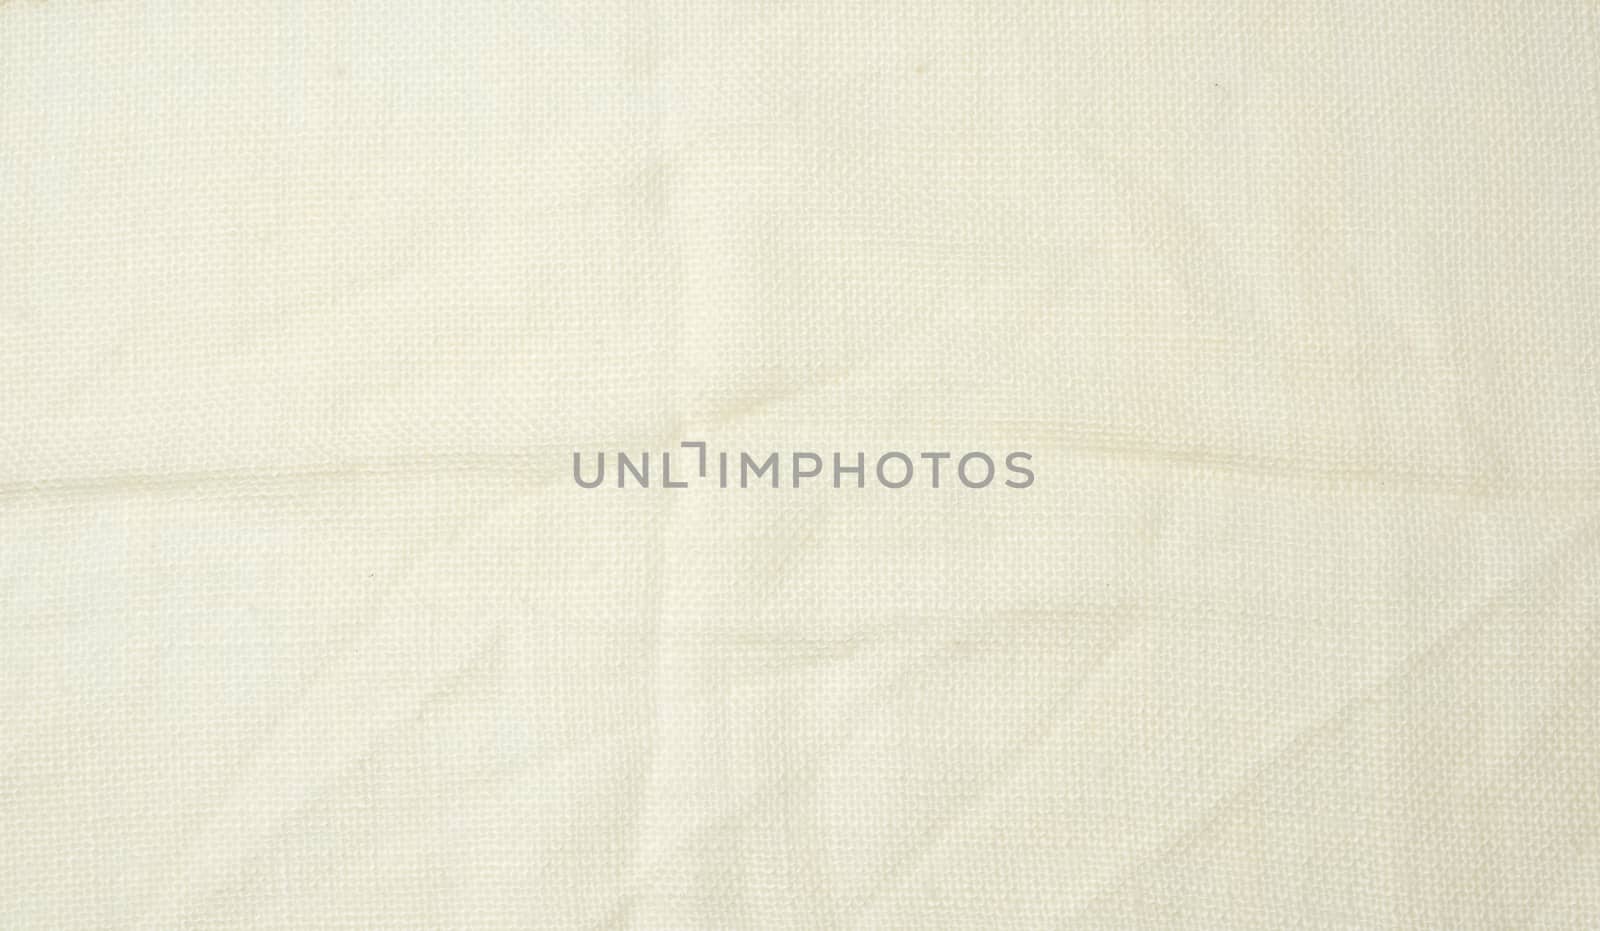 crumpled beige synthetic fabric for the manufacture of lining for skirts, full frame